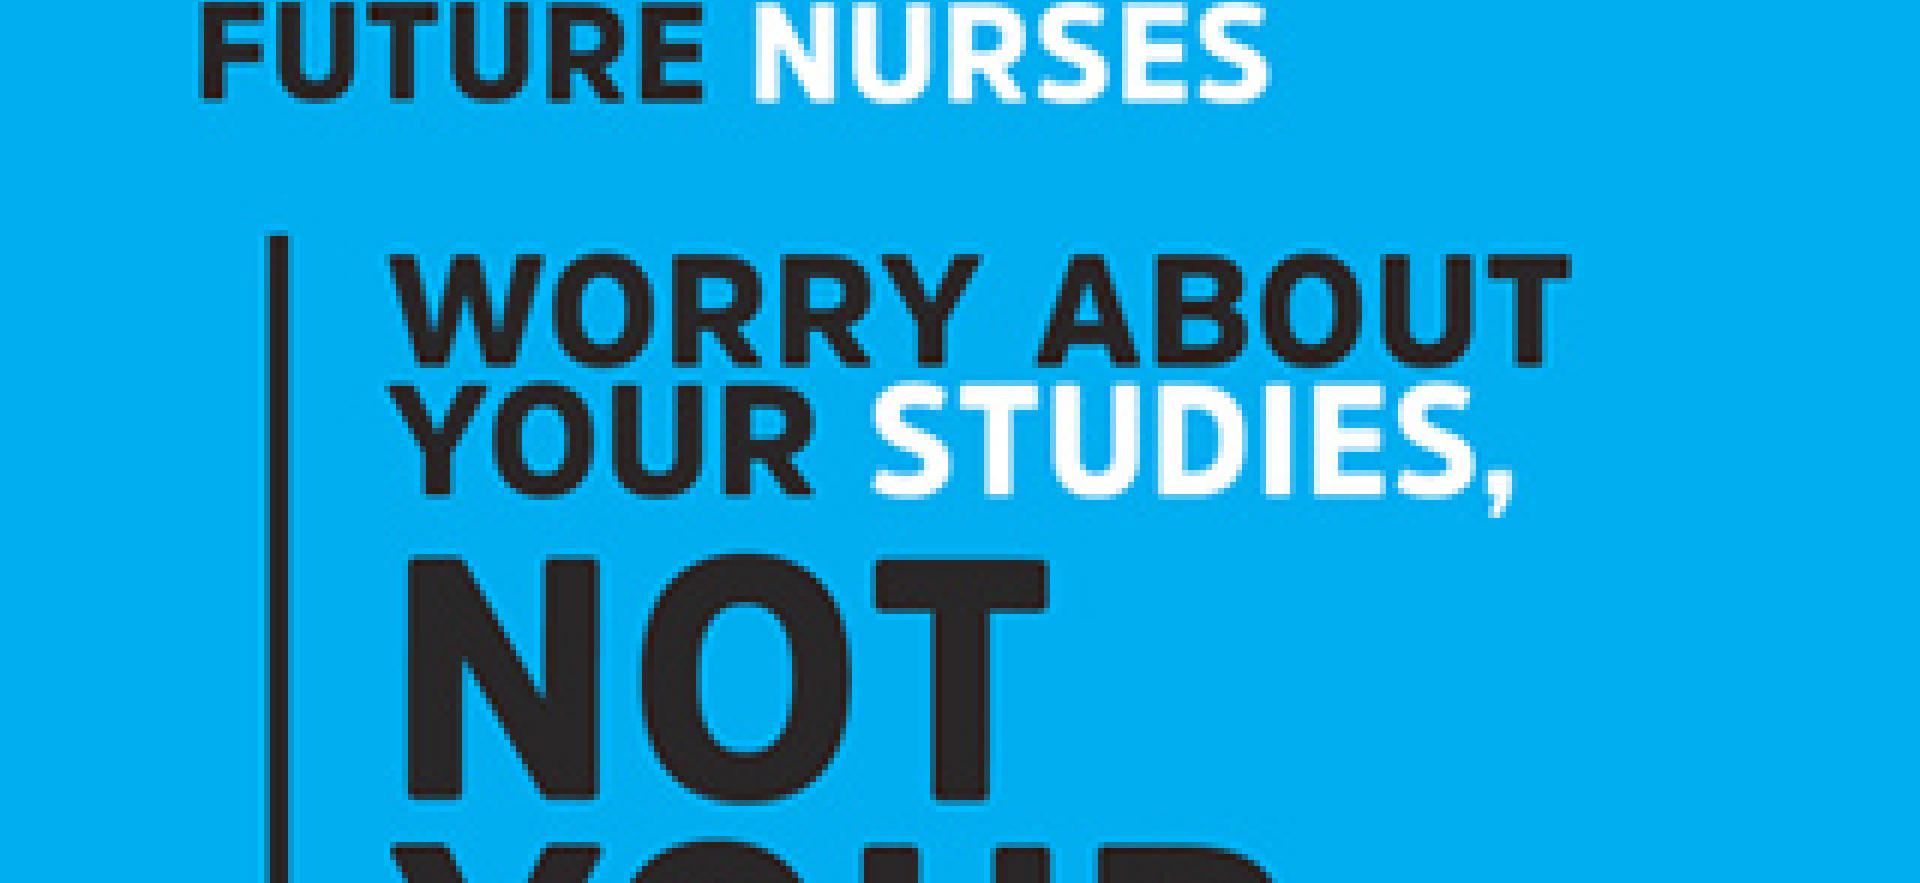 blue background with text "Future Nurses worry about your studies, not your tuition." about the Ontario Learn and Stay Grant